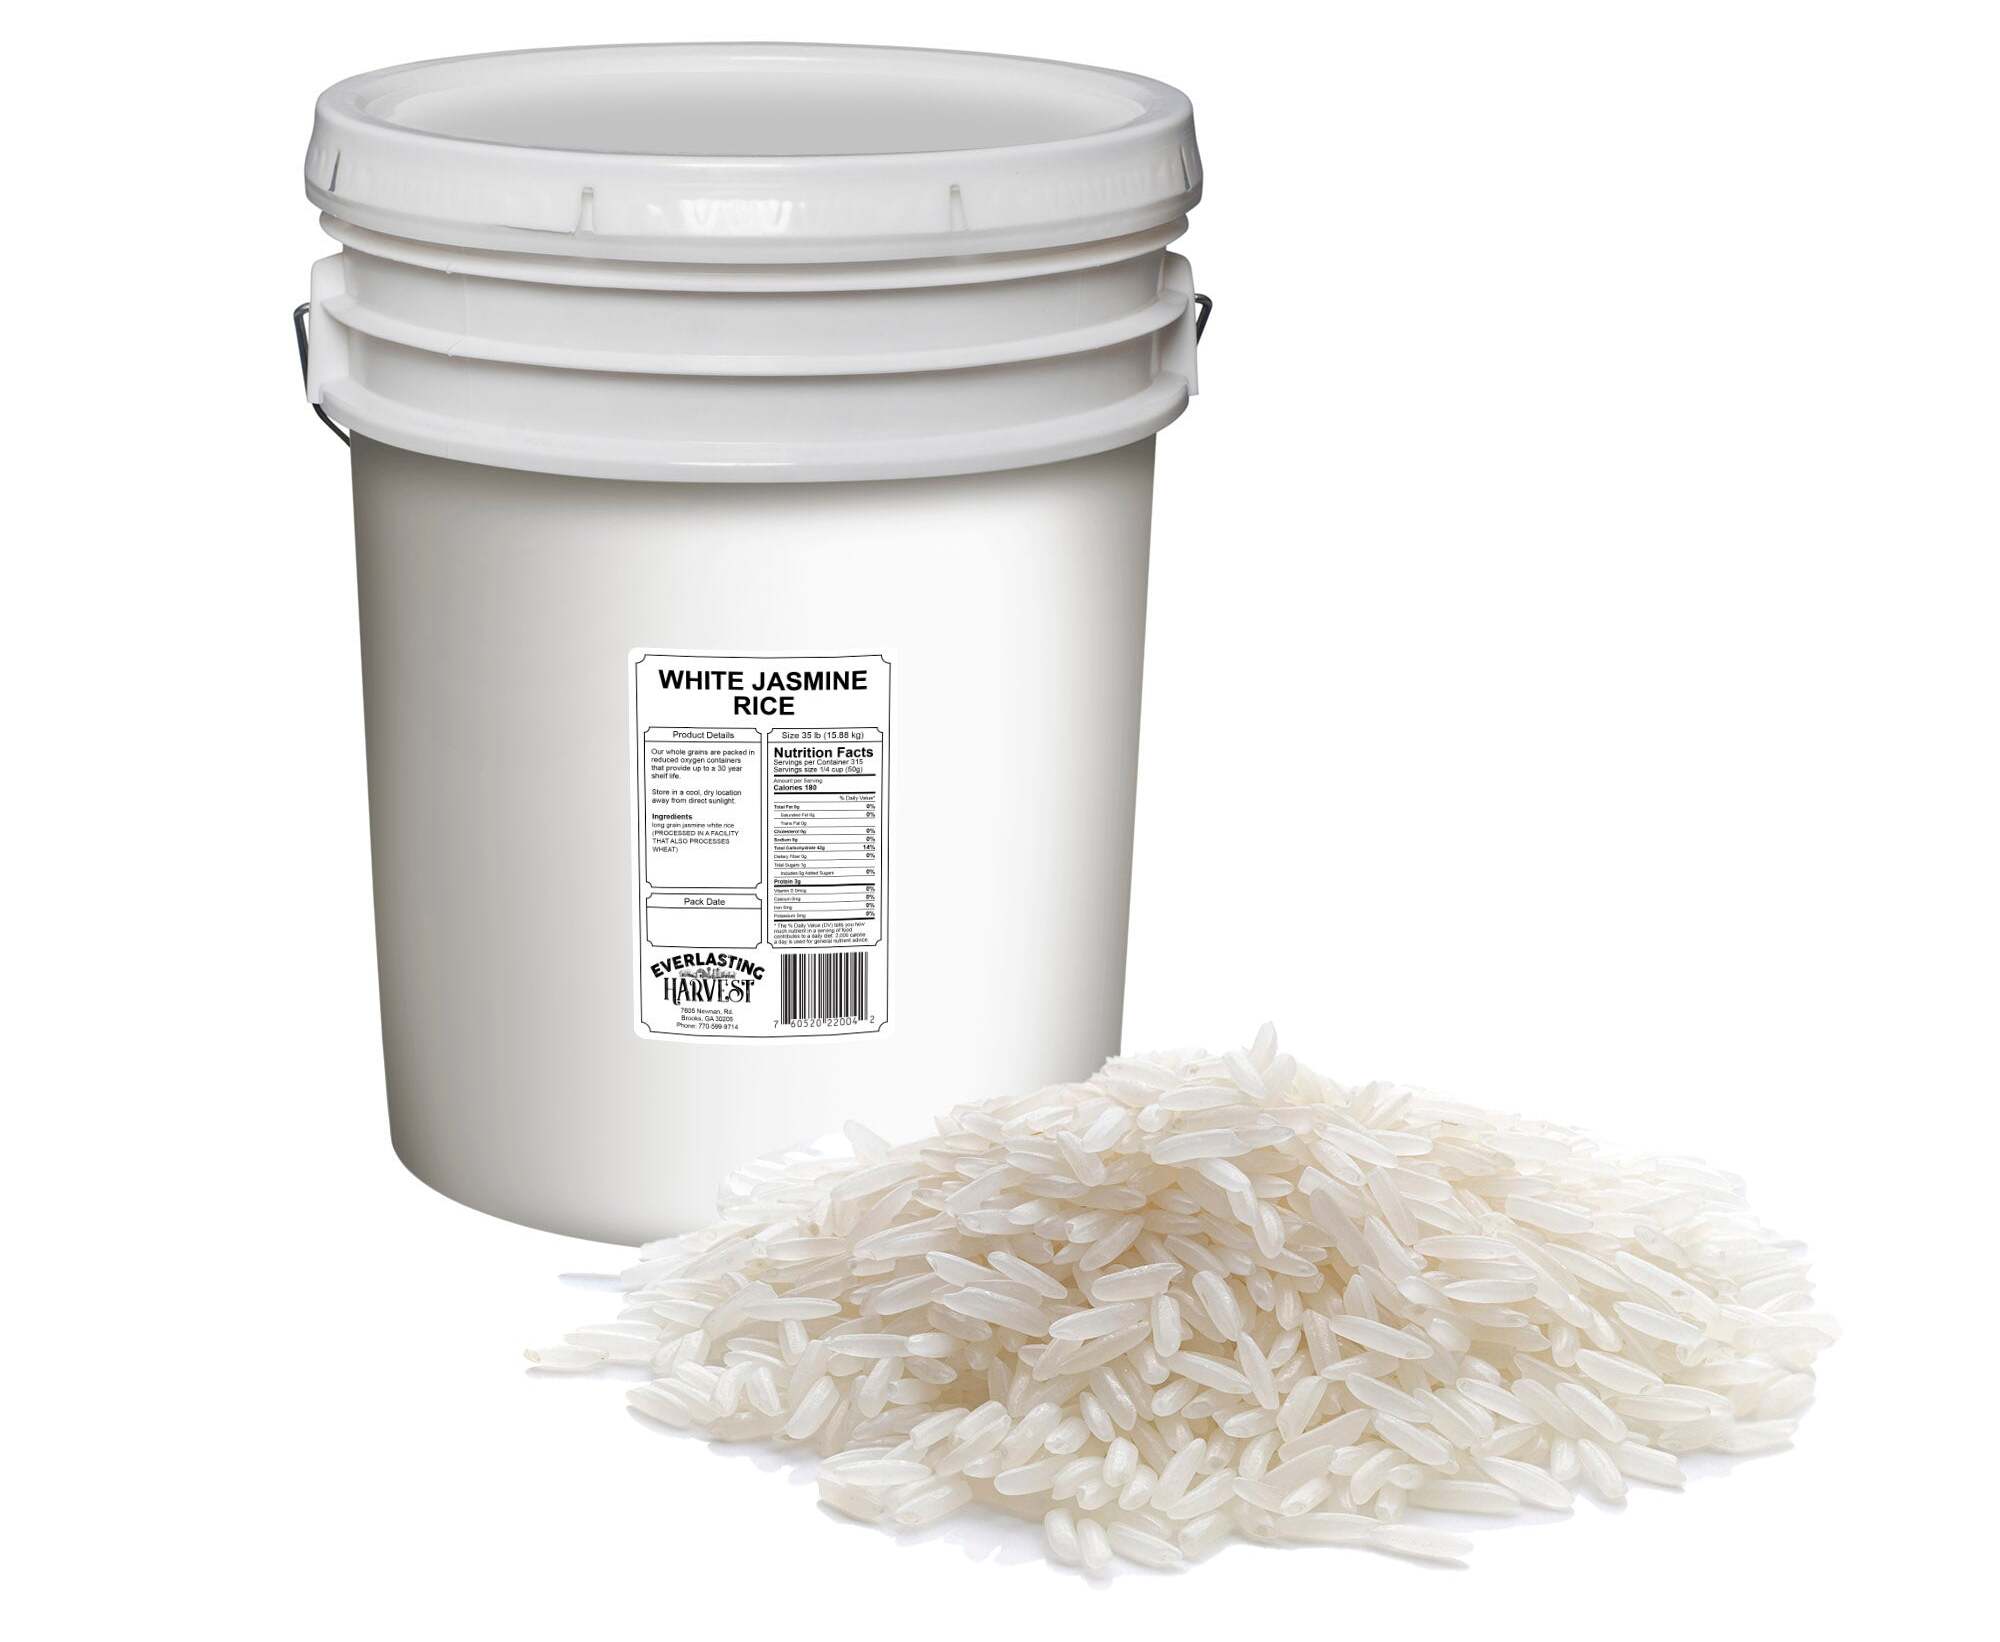 How To Store Rice In 5 Gallon Buckets